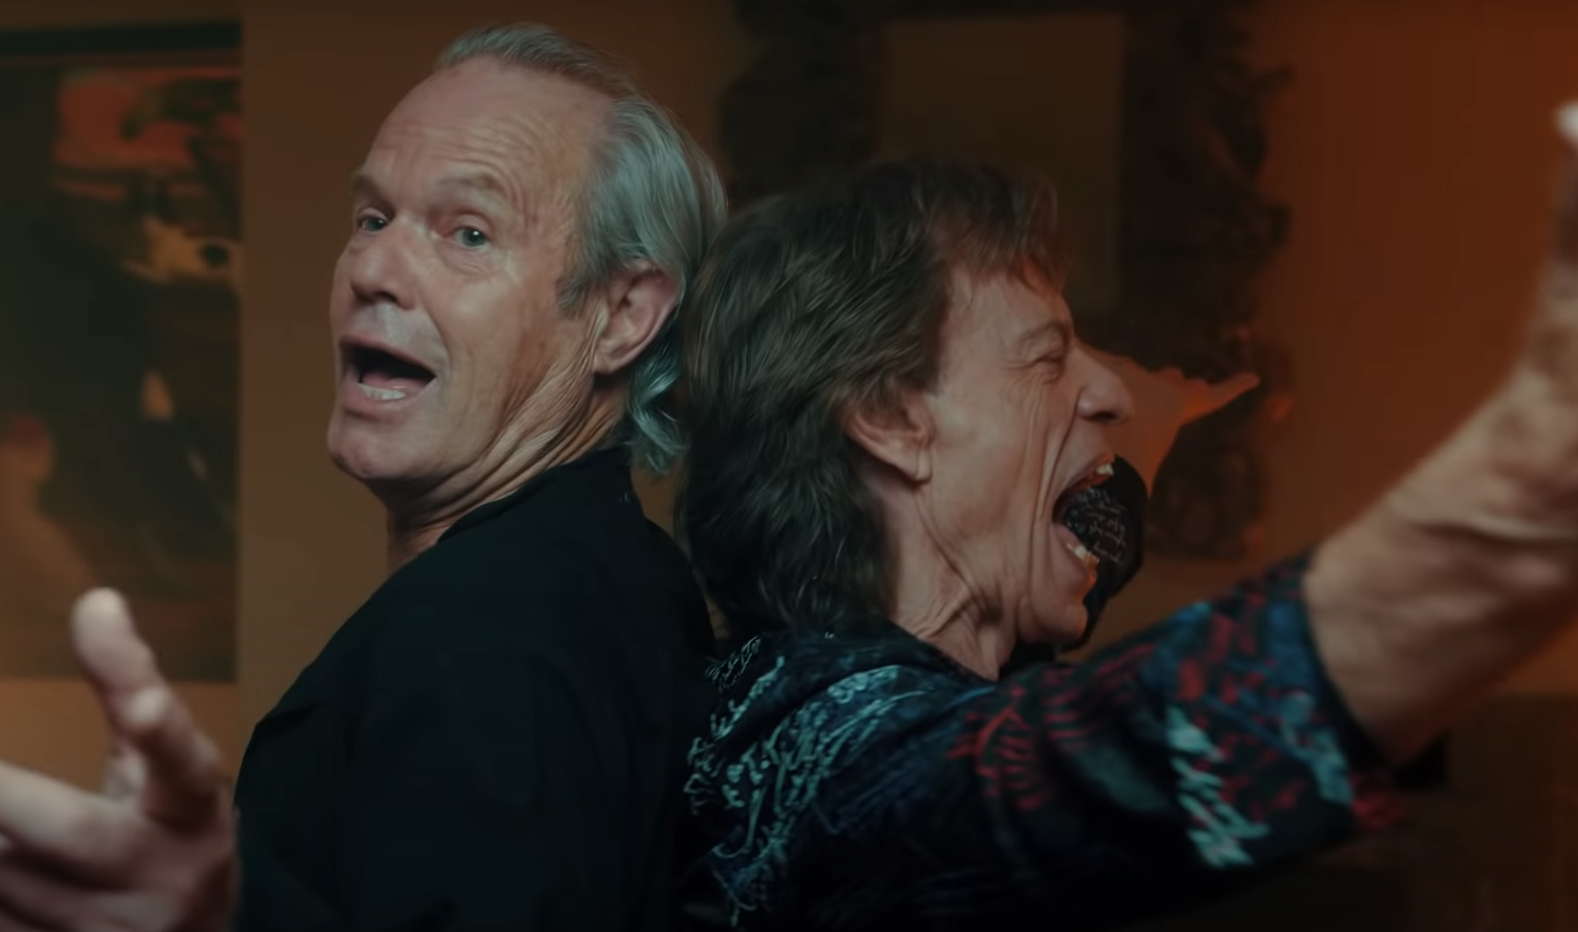 Mick Jagger Duets With Younger Brother Chris Jagger For Chris’s New Song “Anyone Seen My Heart”